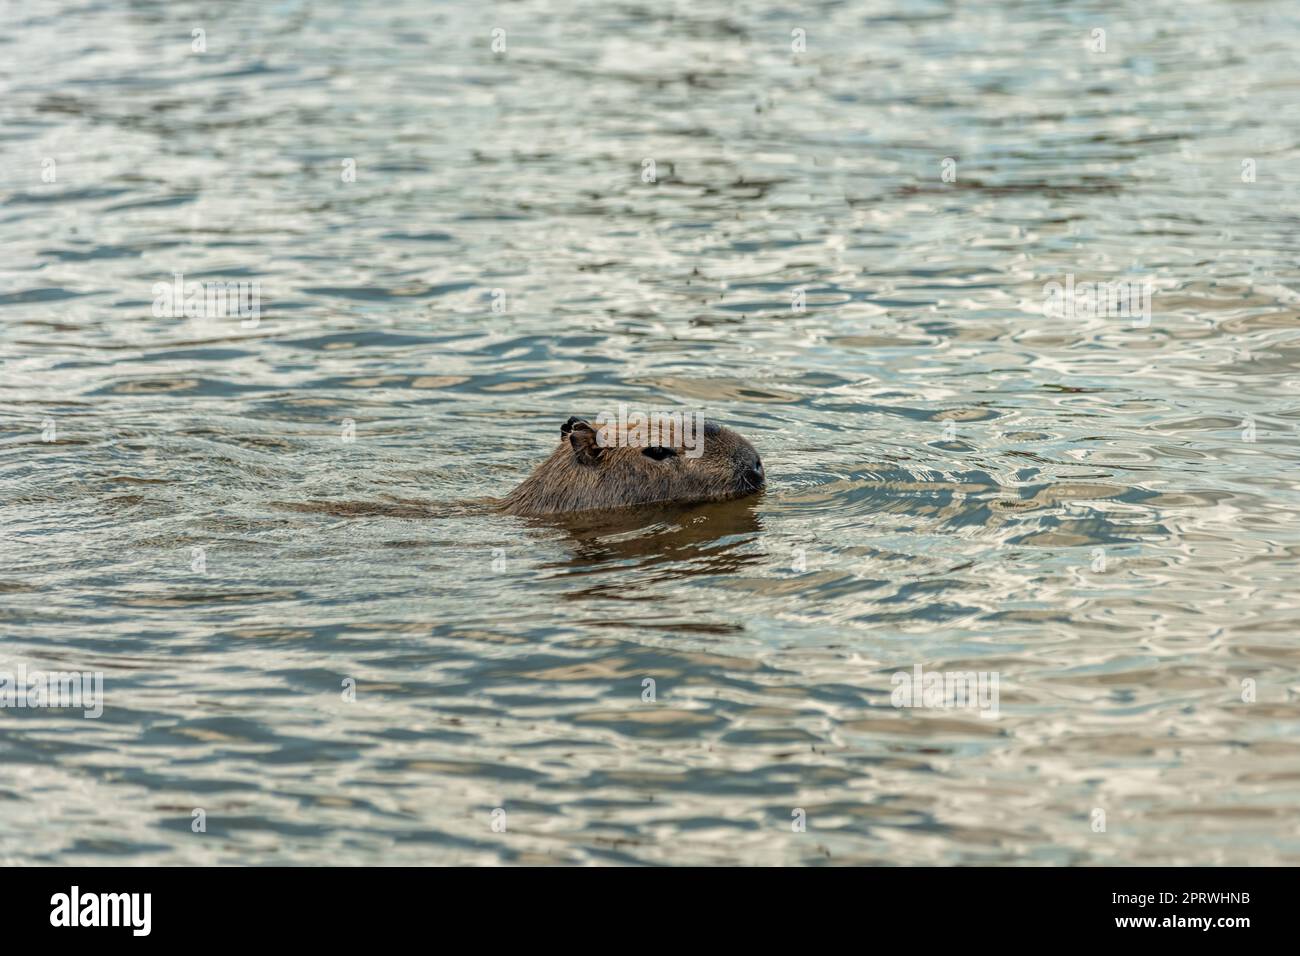 The world's largest rodent Capybara swims in the river. Stock Photo